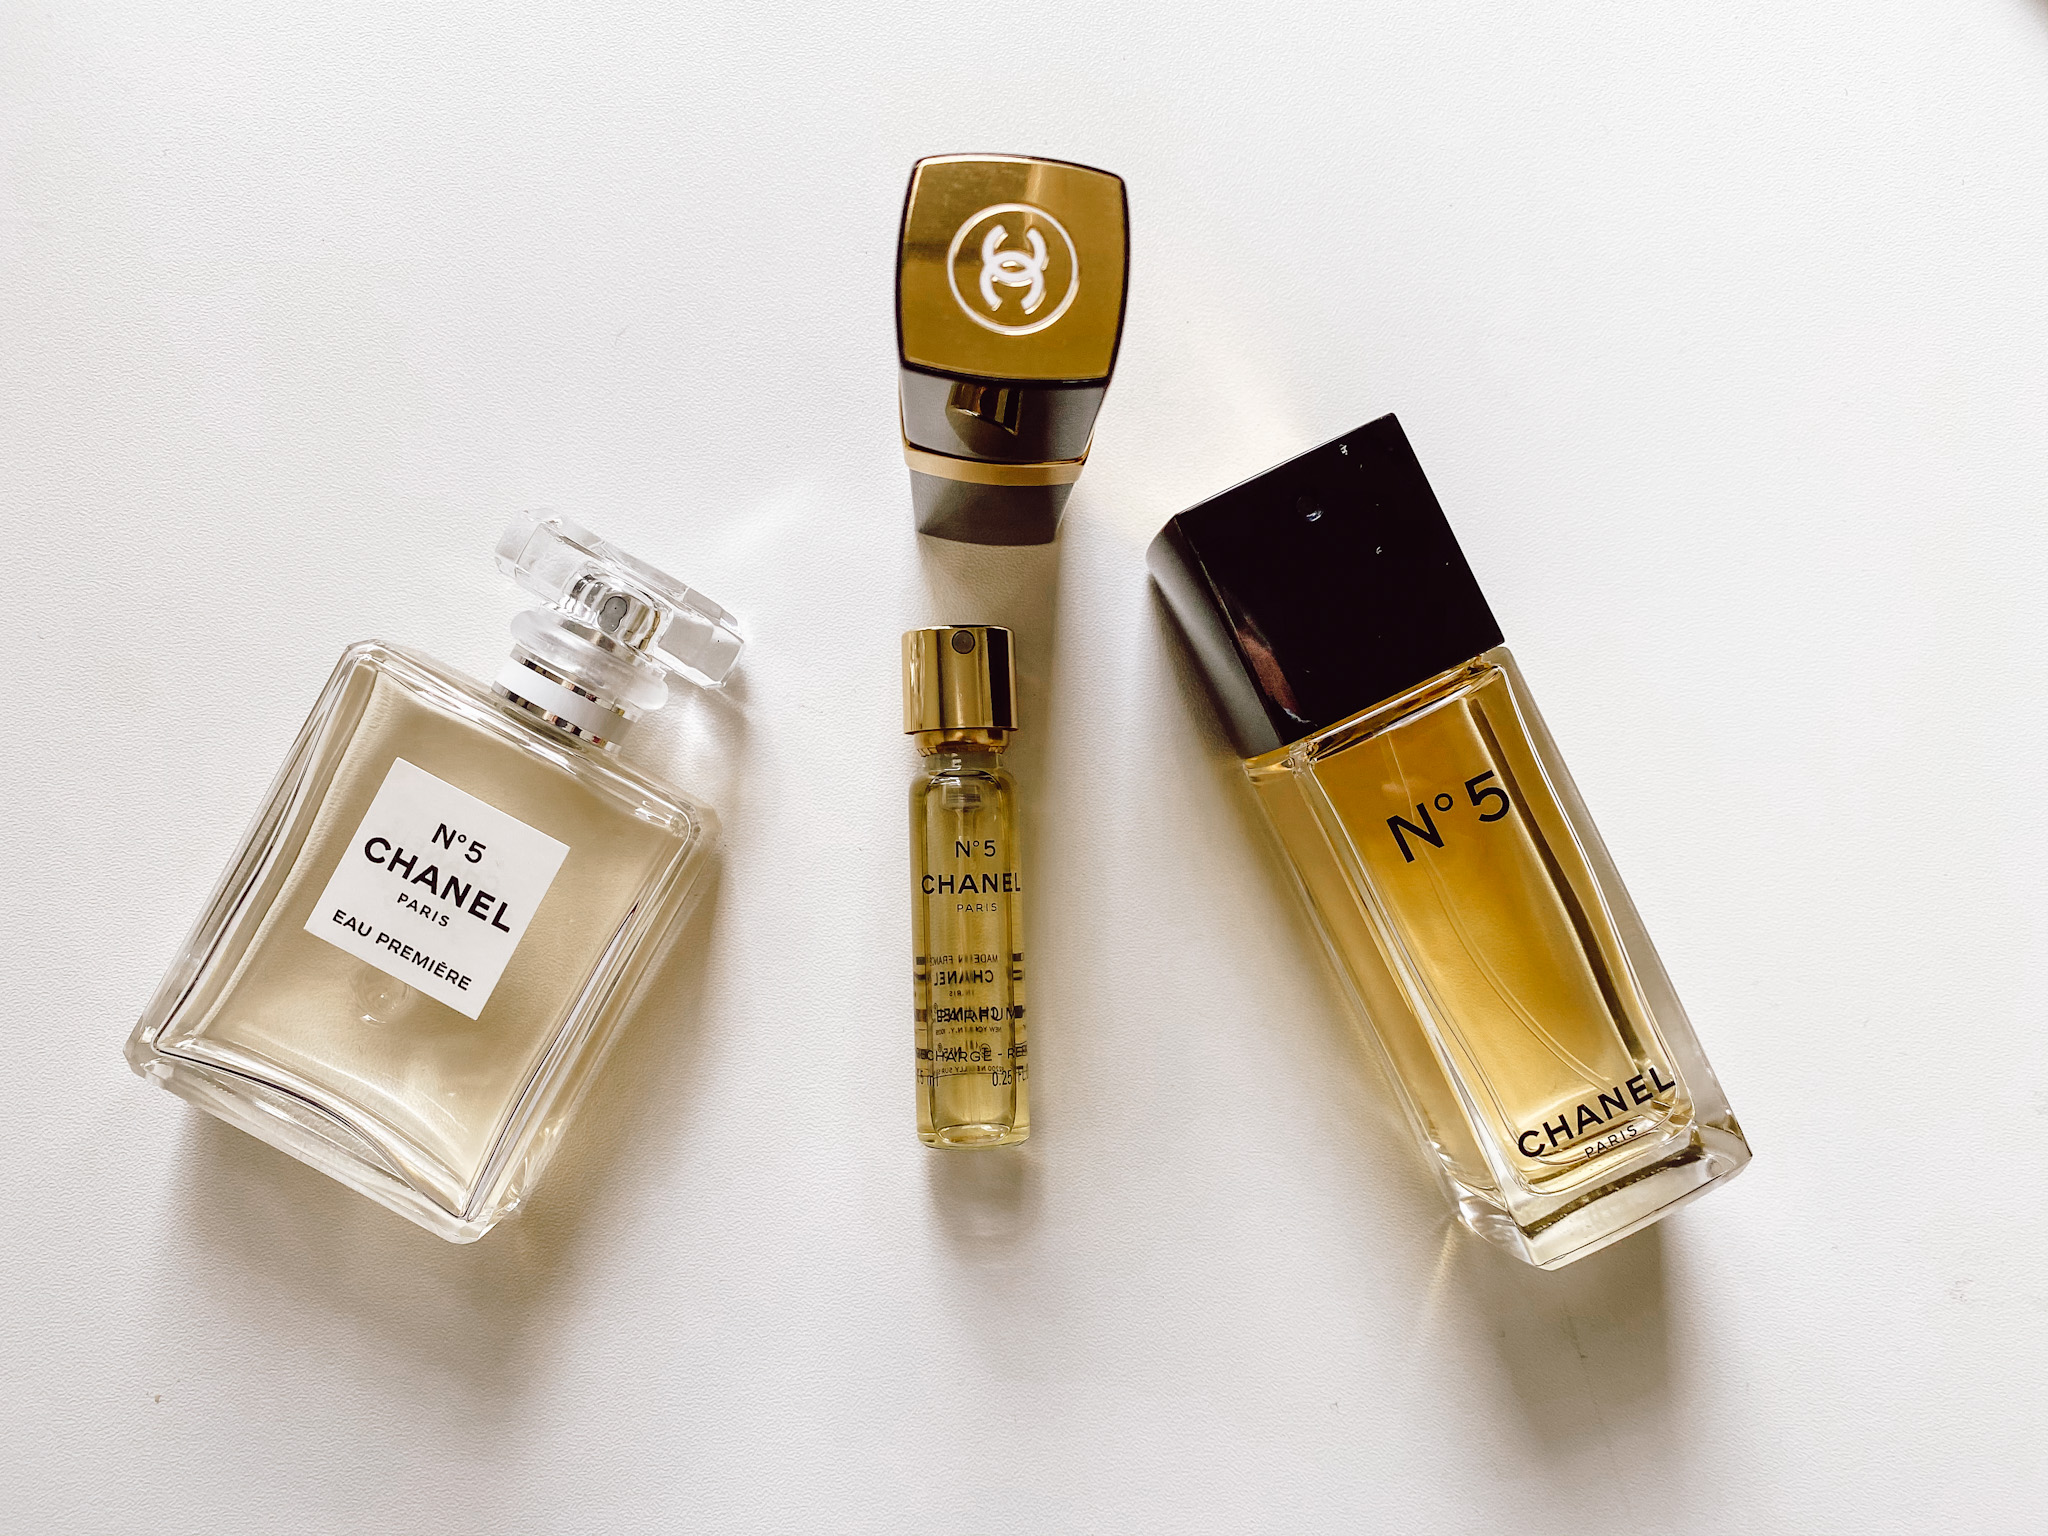 Uplifting Cult Favourites from the Chanel No.5 Perfume Range